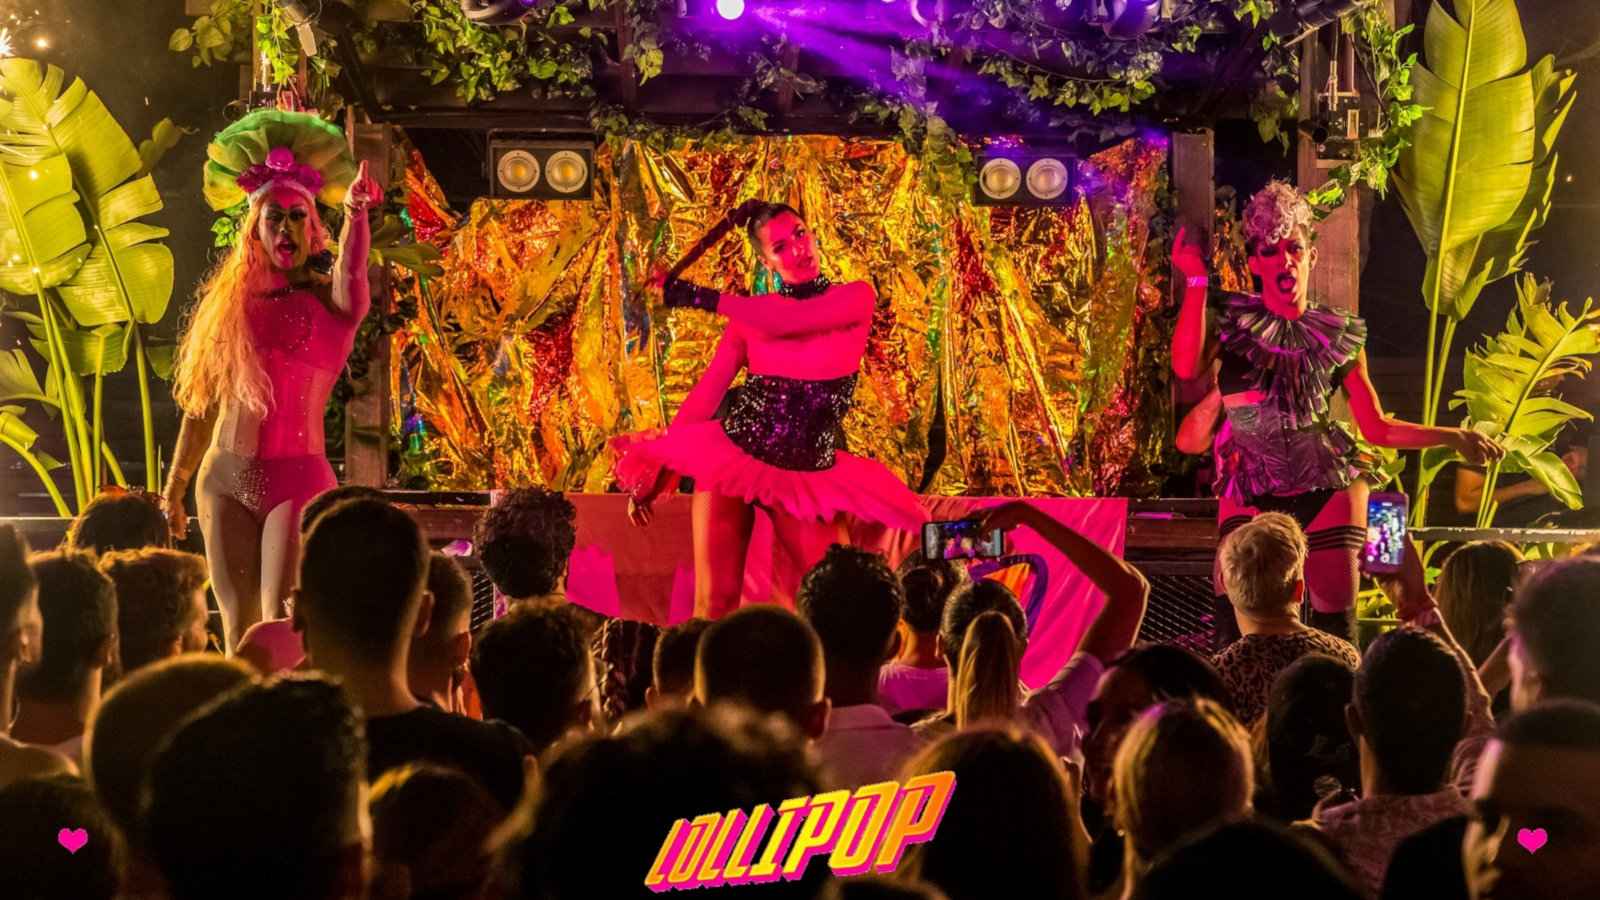 Lollipop is a community that organises the best gay parties in Malta at a variety of spaces